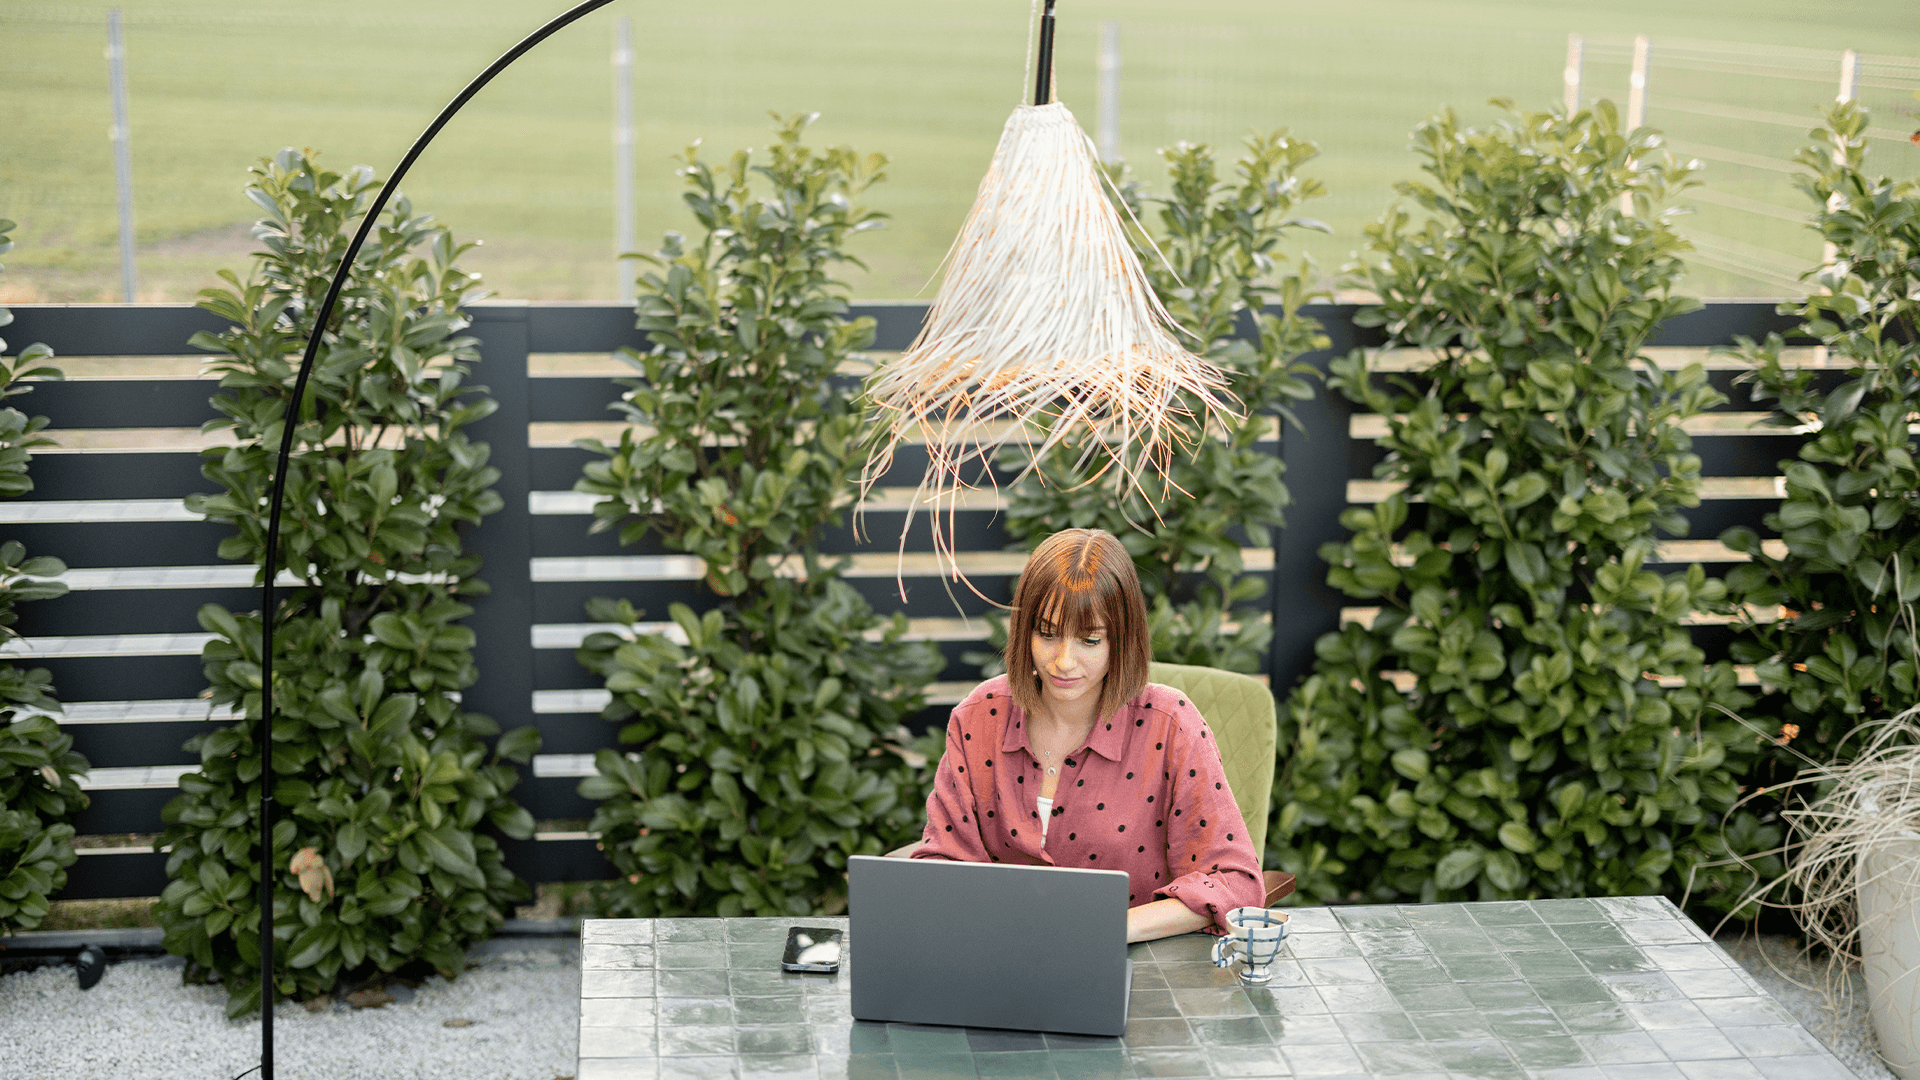 Young woman works on laptop at outdoor workspace in the garden